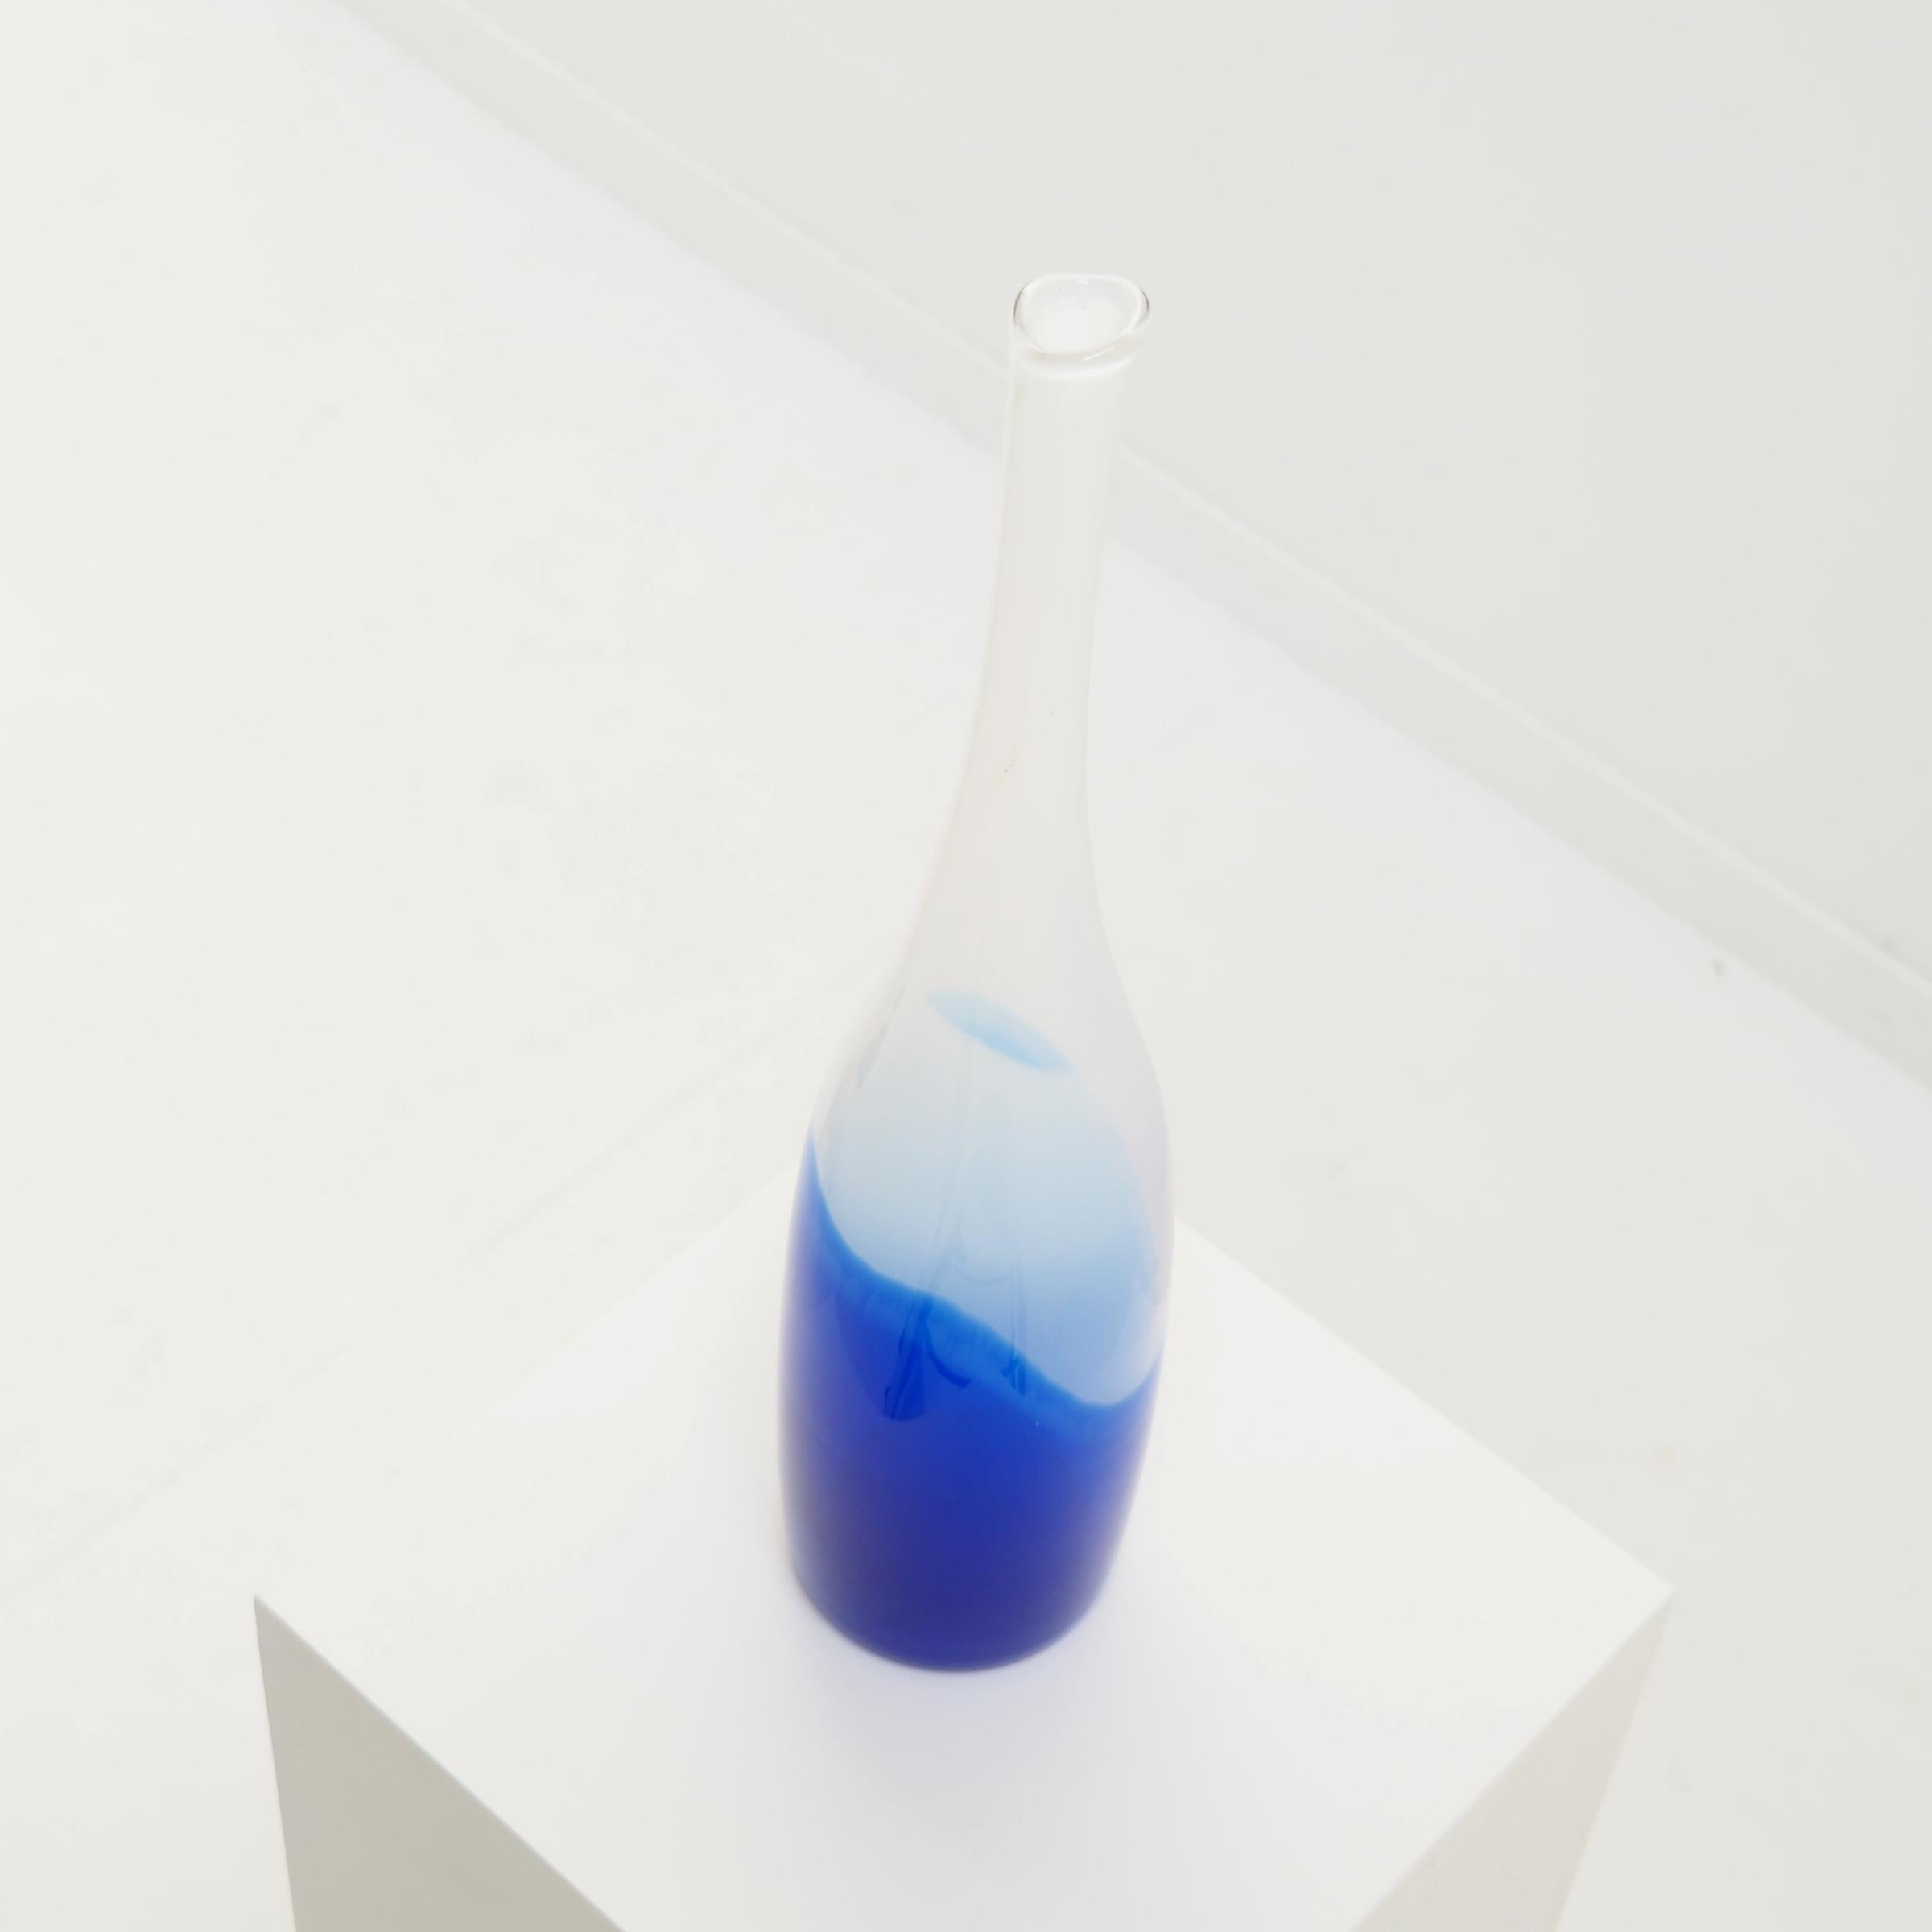 Bottle vase designed by Dutch designer Floris Meydam for ‘Glasfabriek Leerdam’.

The vase was designed in 1953 as a serica, which means that it is not a unique piece, nor is it a mass produced object. Meydam used sleek and simple, industrial shapes